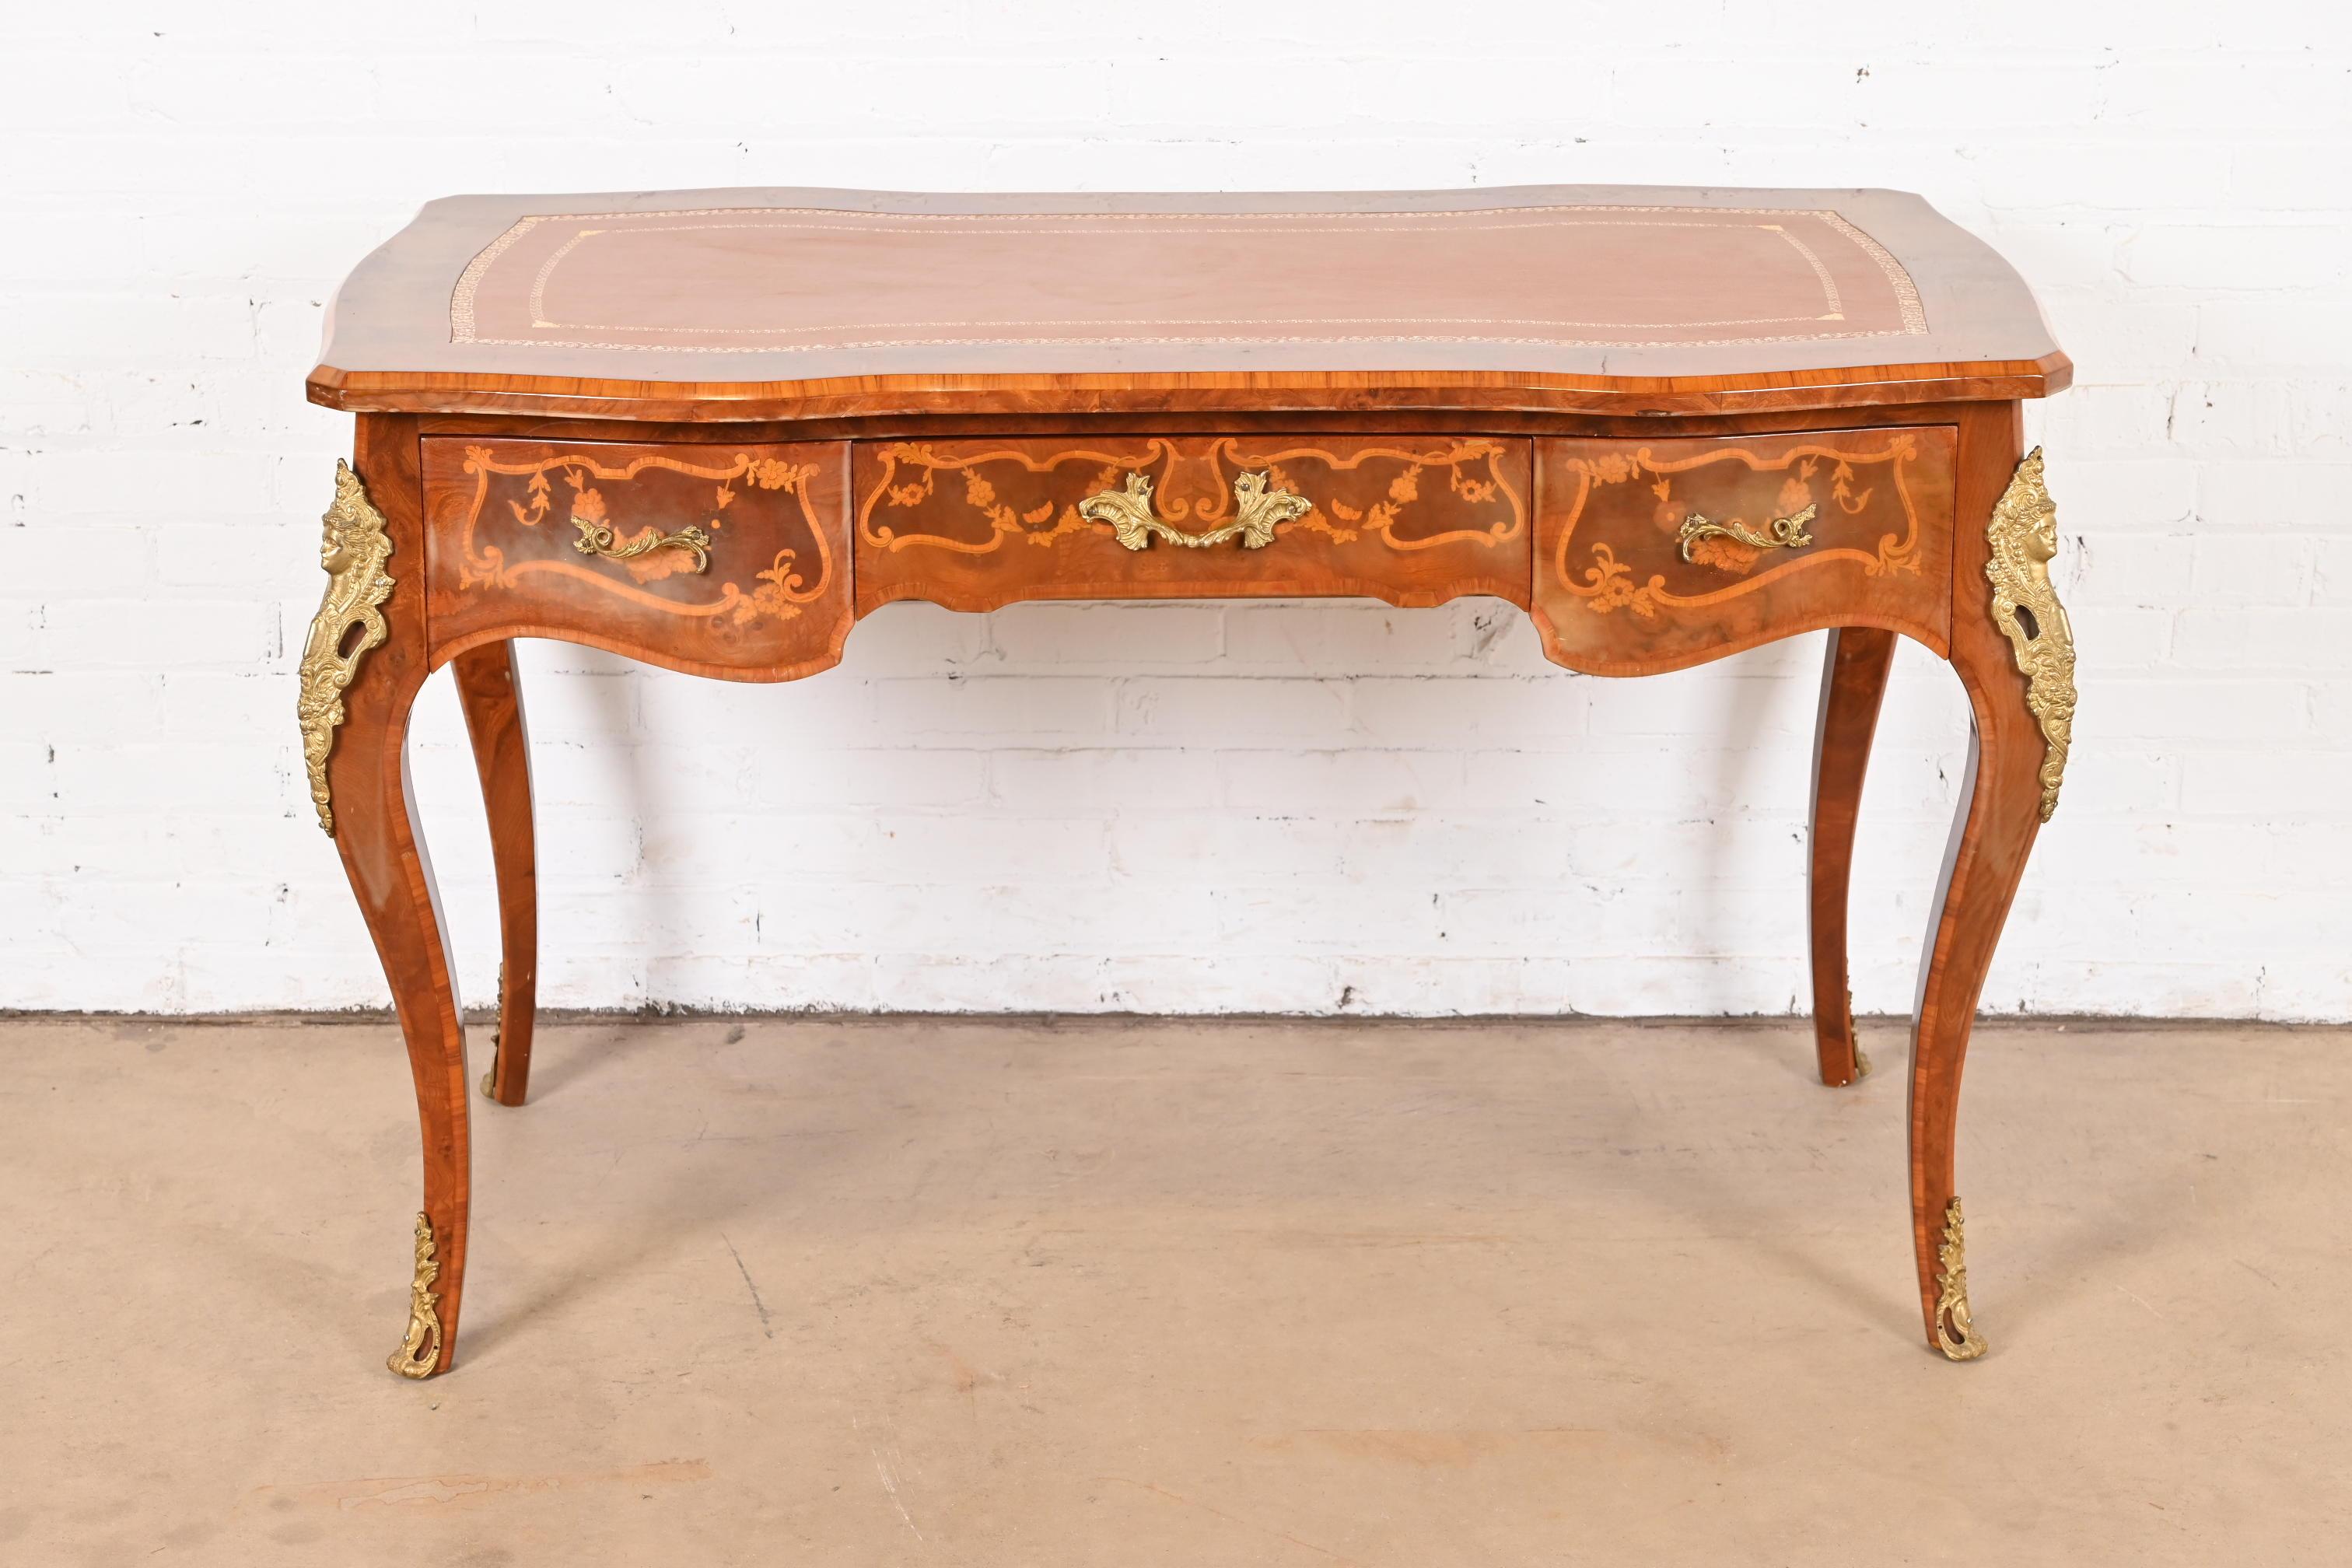 An outstanding Italian Louis XV style writing desk or bureau plat desk

Italy, Circa 1940s

Gorgeous burl wood, with inlaid marquetry, ornate ormolu mounts, and embossed brown leather top.

Measures: 51.25